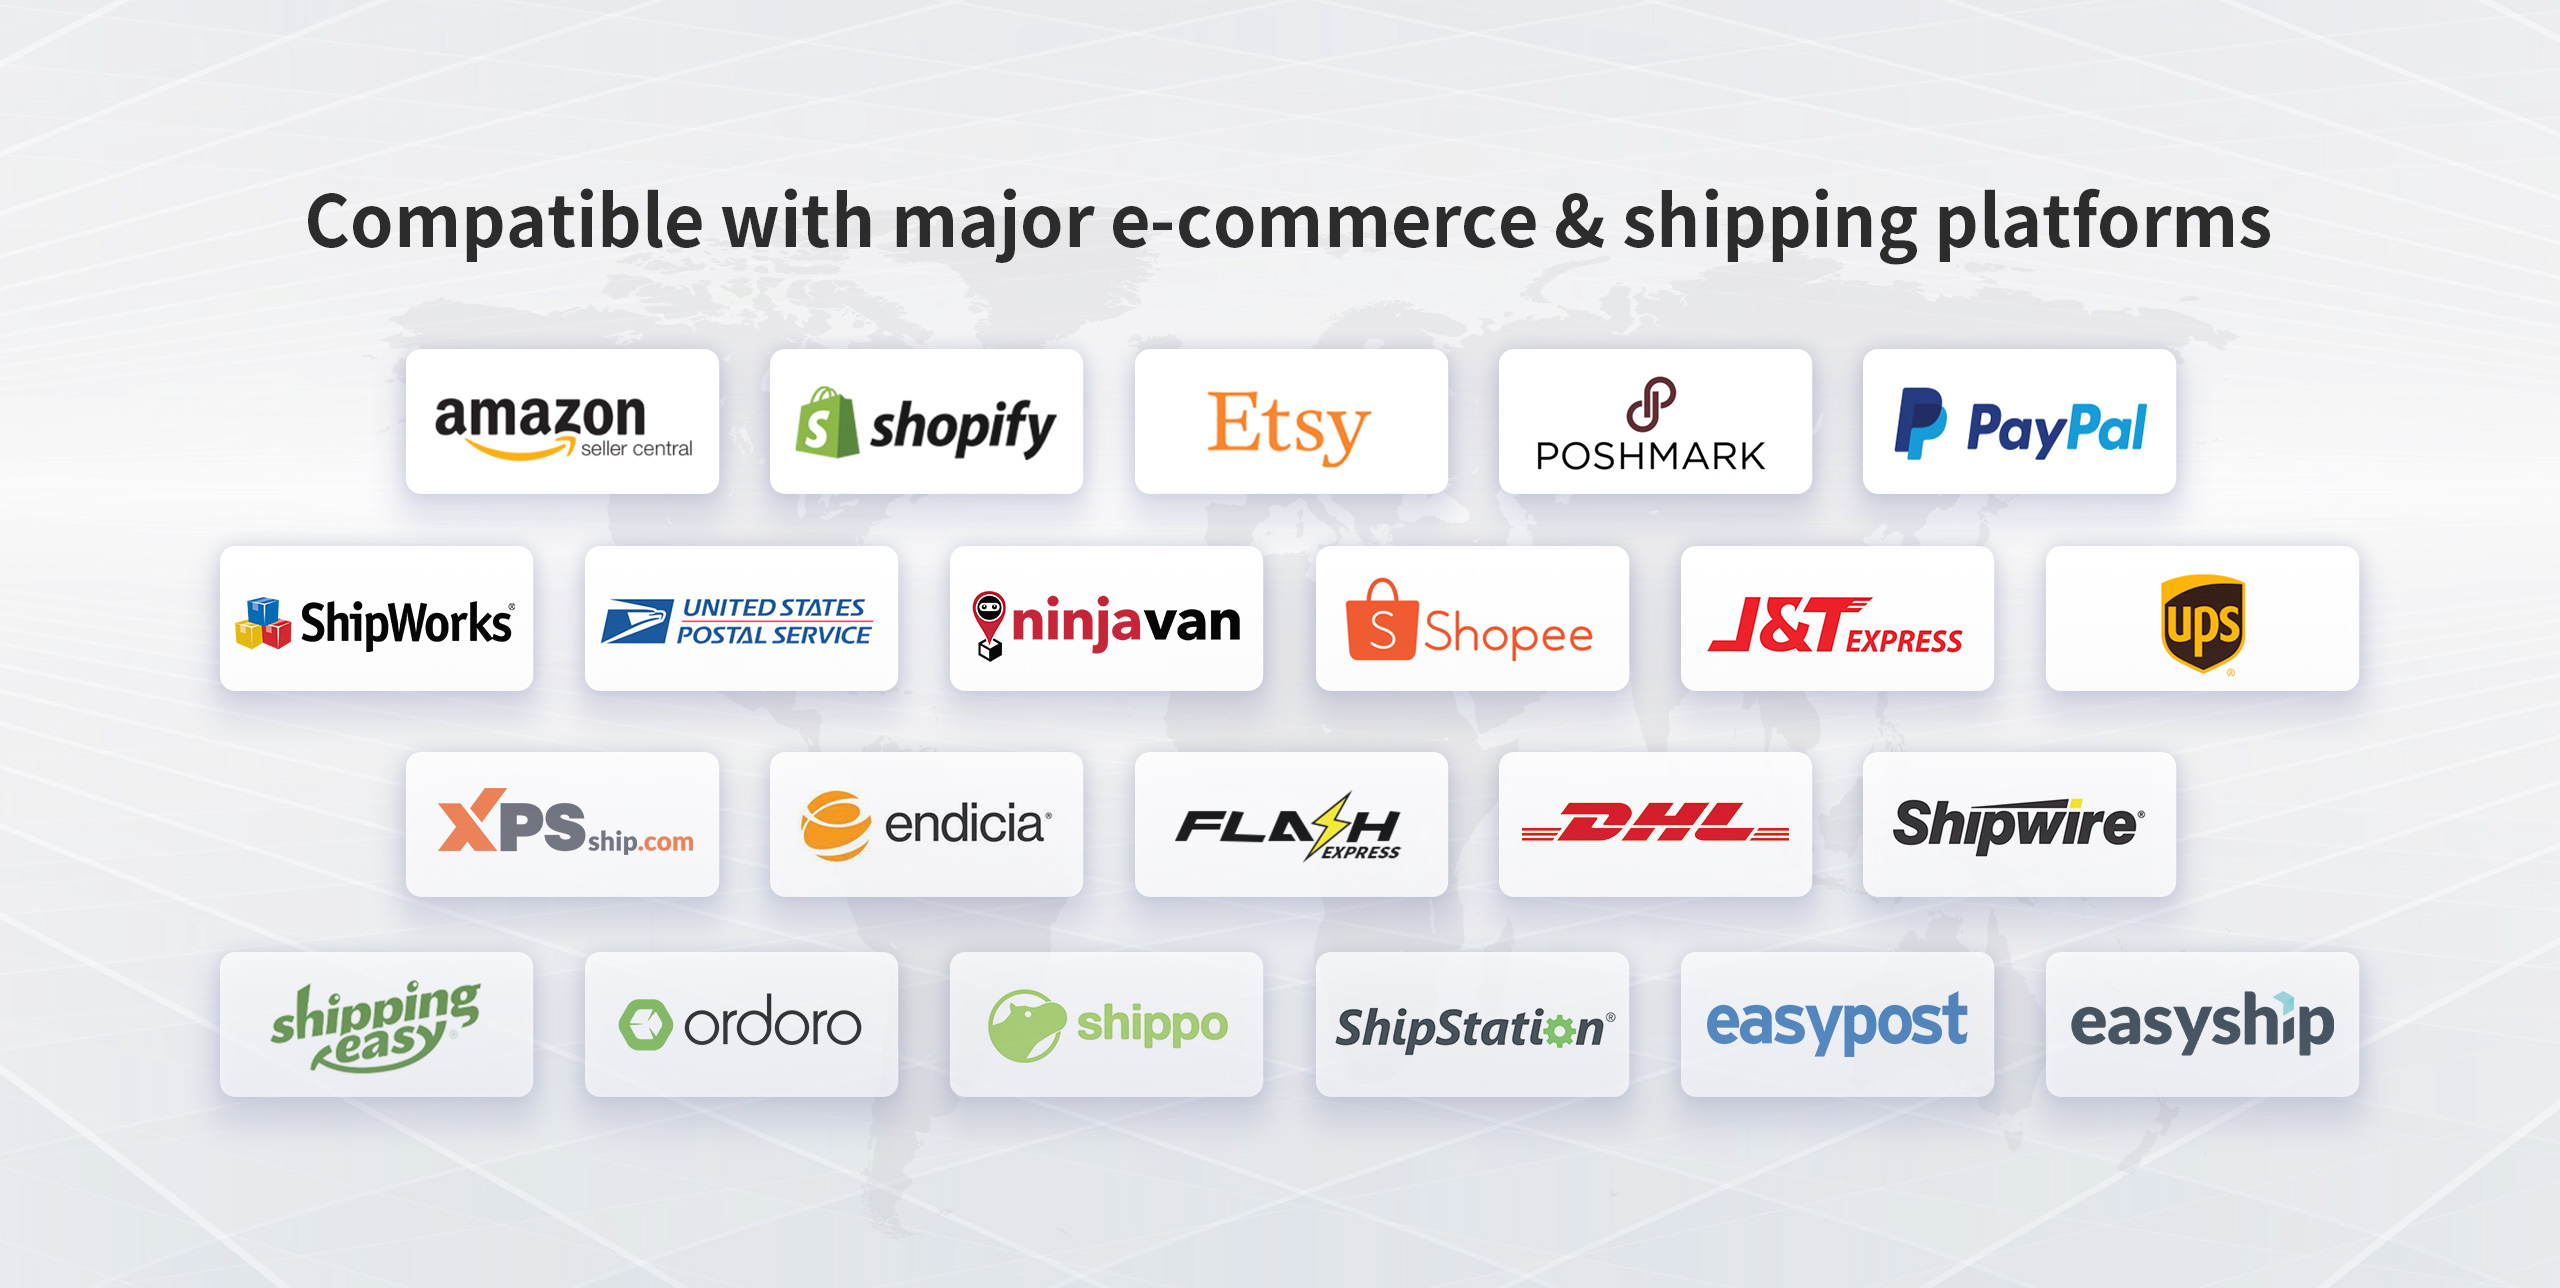 Compatible with major e-commerce & shipping platforms